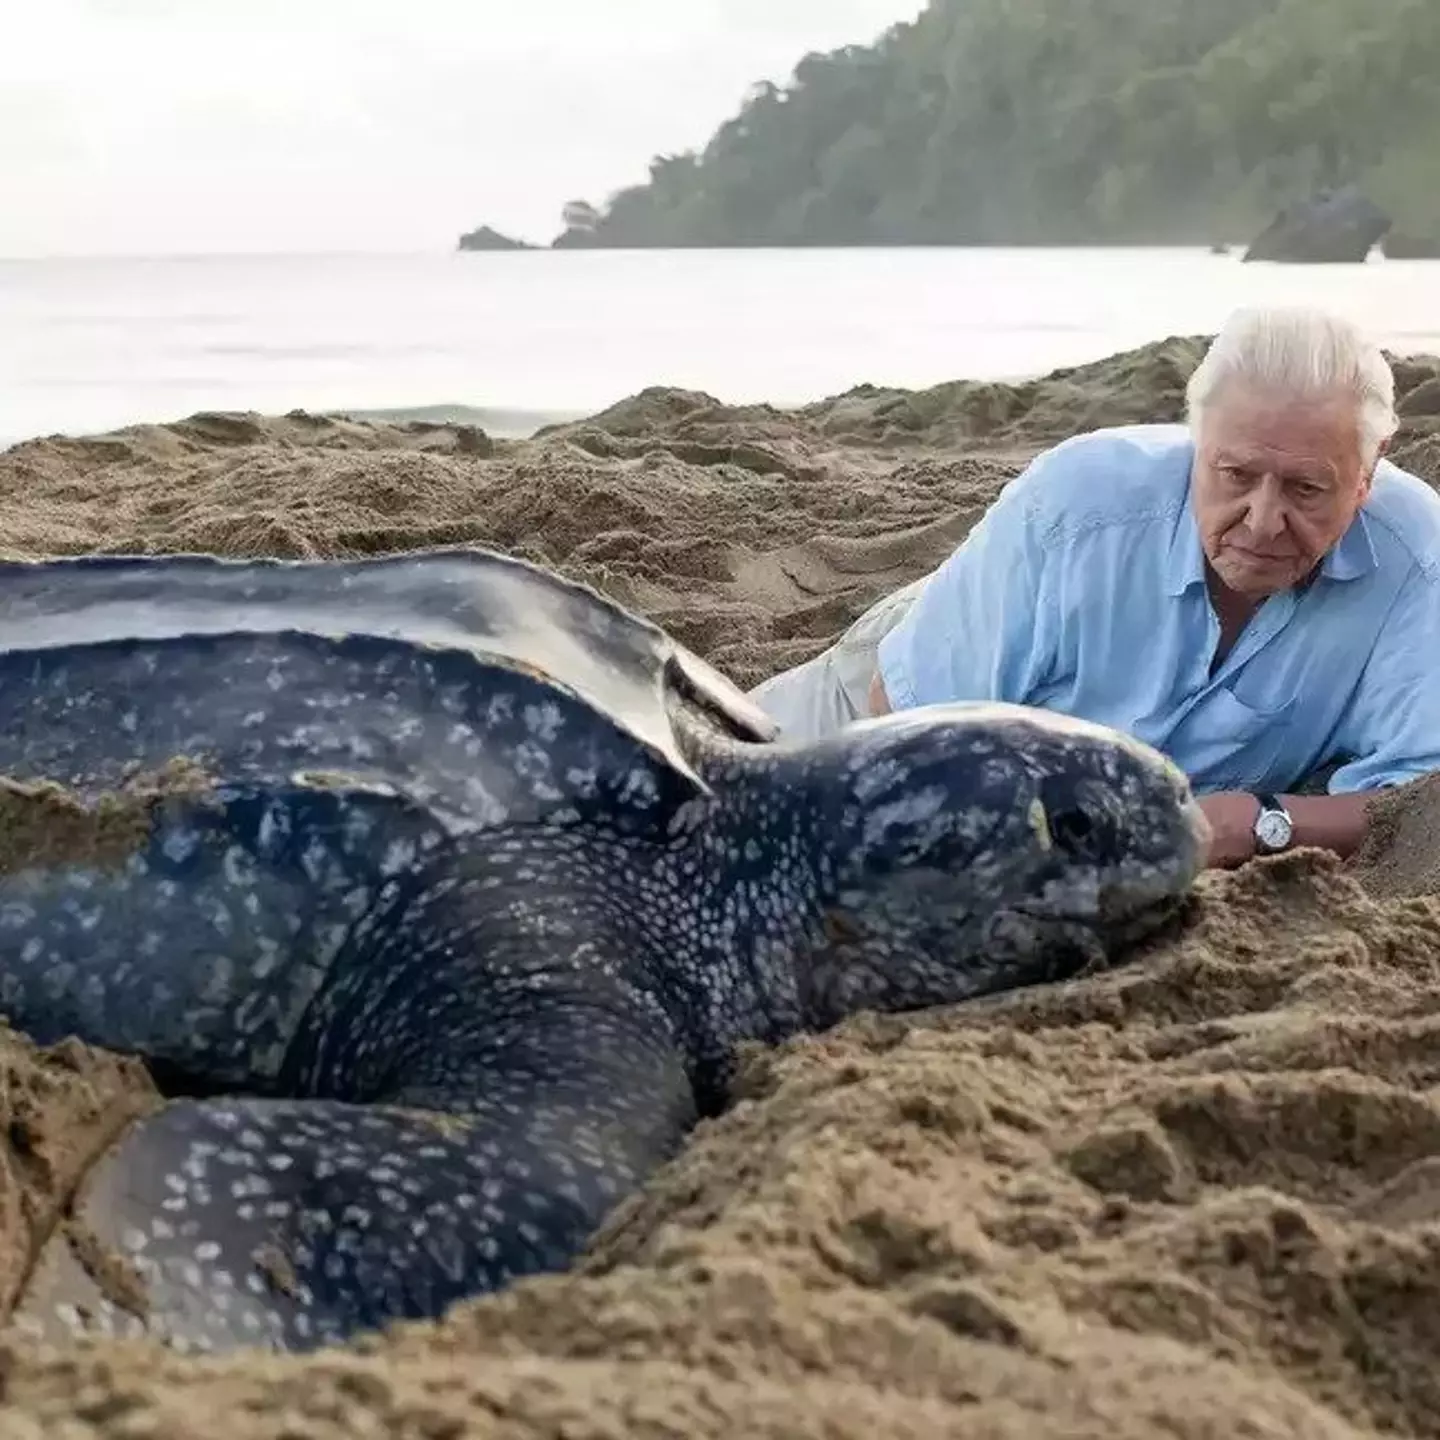 The incident happened during filming for a David Attenborough show.